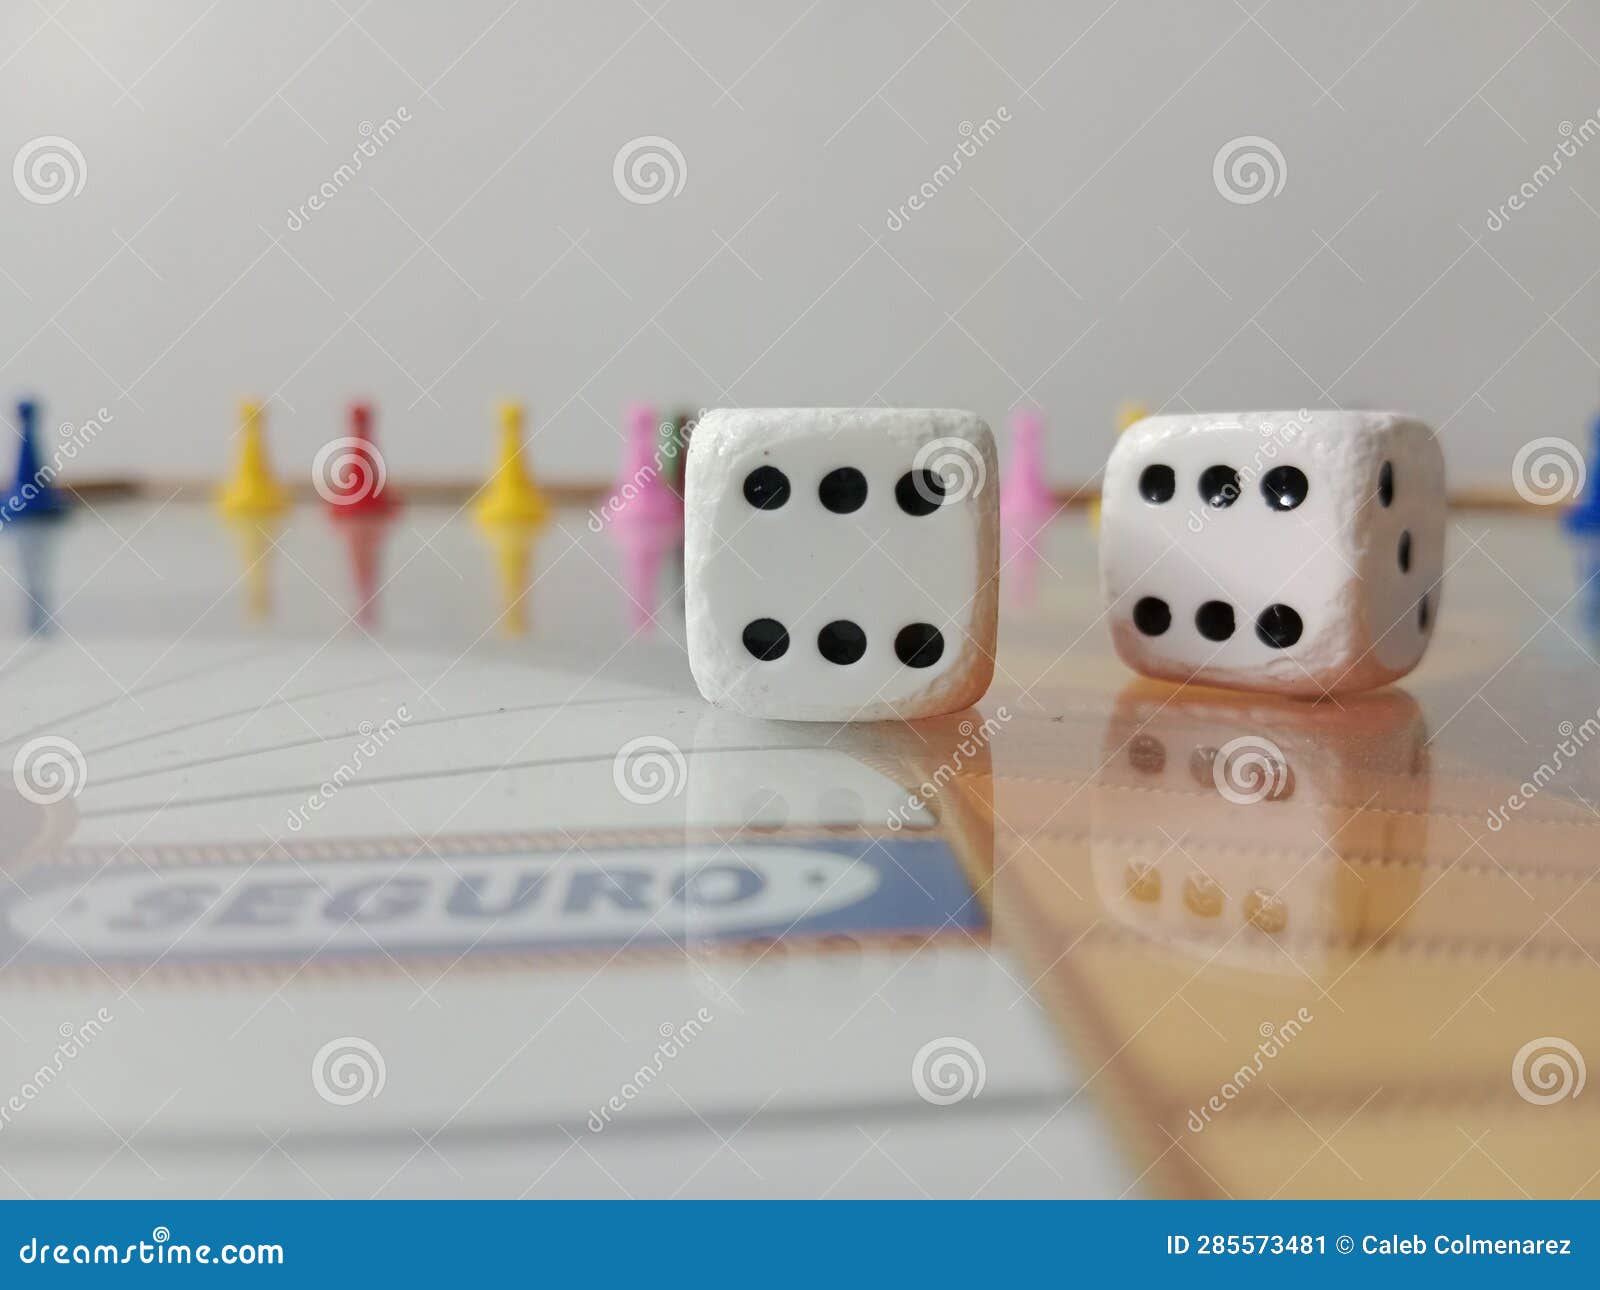 dice on the board and park tokens in the background